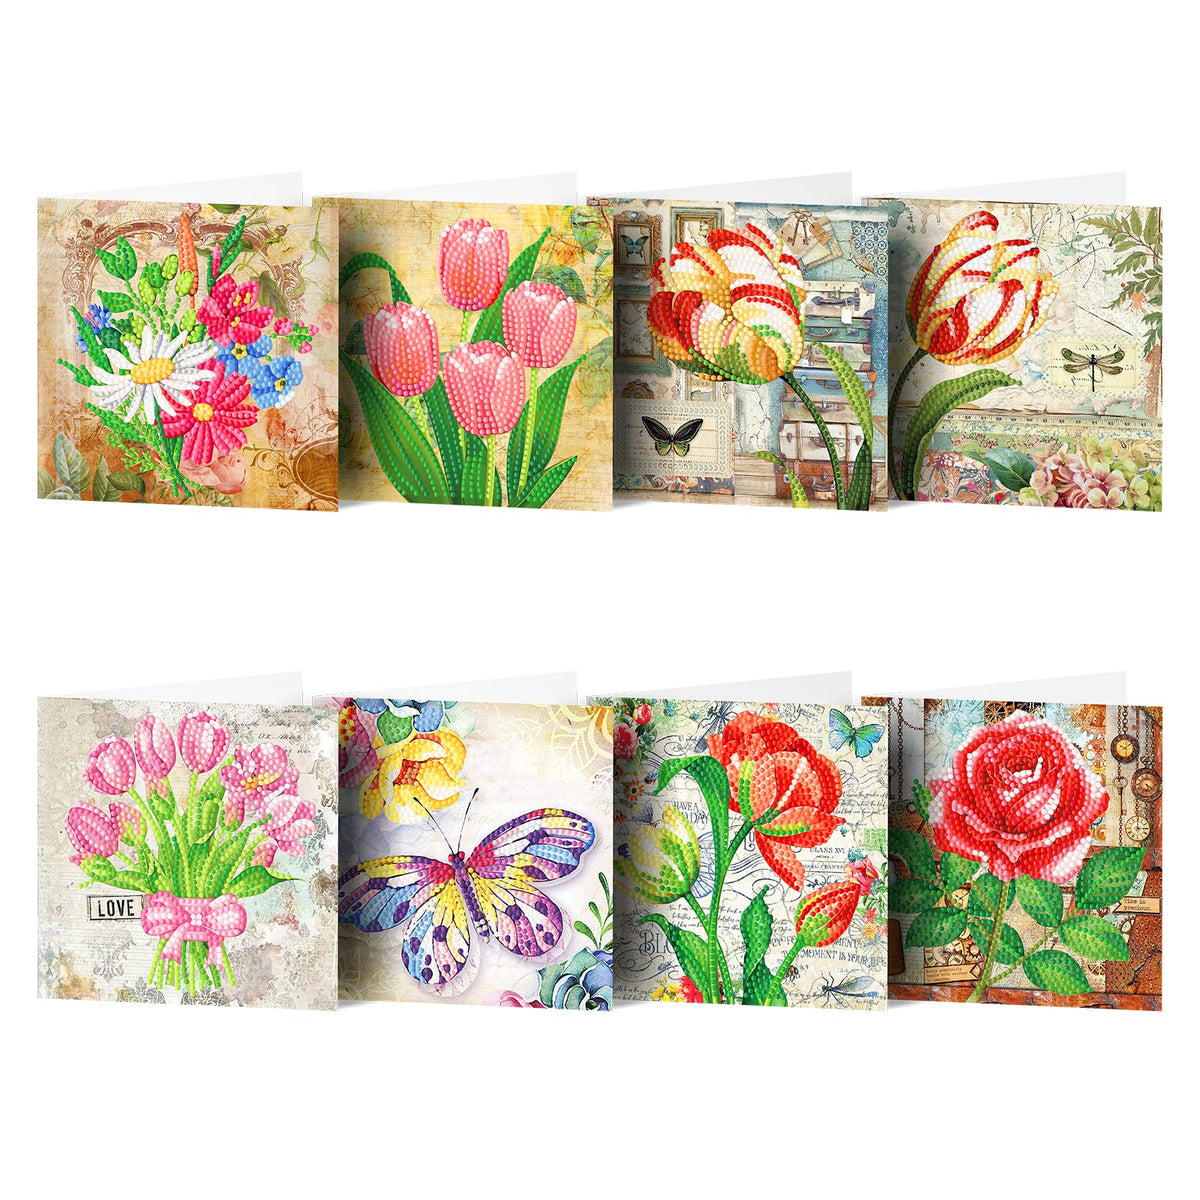 5D DIY Diamond Drawing Holiday Card/Birthday Greeting Cards Kit,Diamond Painting Tools whit Envelopes,Shaped Drill Greeting Thank You Card Gifts Mosaic Set (Flower C)